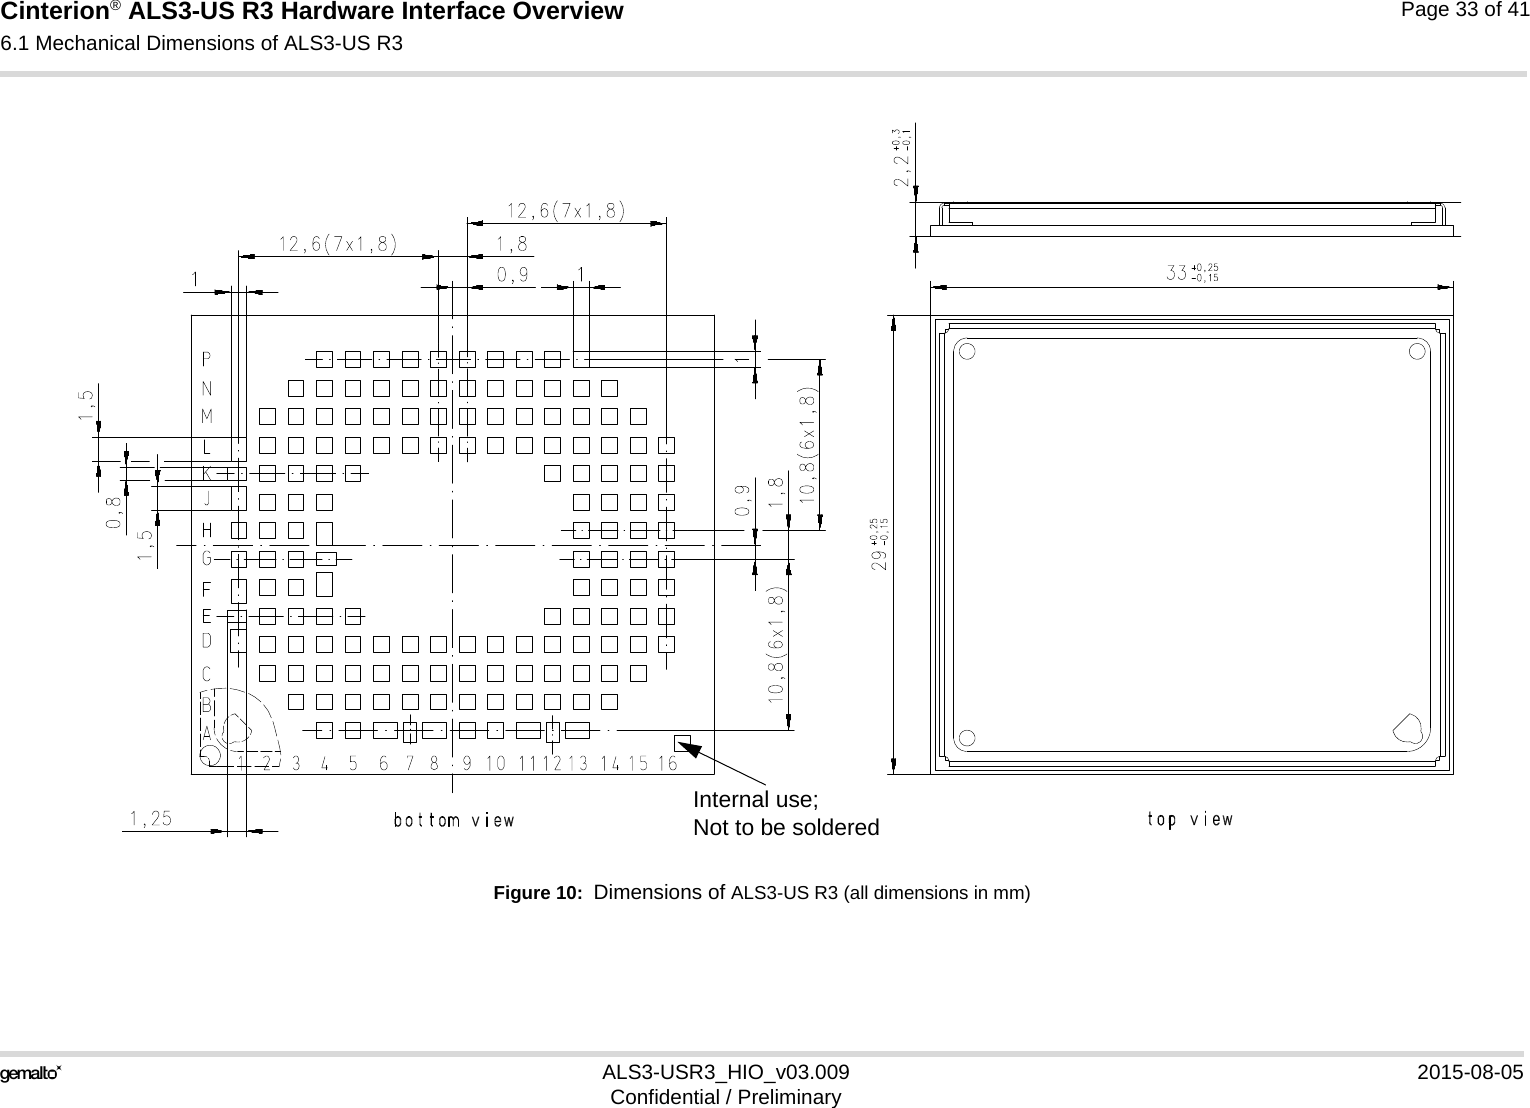 Cinterion® ALS3-US R3 Hardware Interface Overview6.1 Mechanical Dimensions of ALS3-US R333ALS3-USR3_HIO_v03.009 2015-08-05Confidential / PreliminaryPage 33 of 41Figure 10:  Dimensions of ALS3-US R3 (all dimensions in mm)Internal use; Not to be soldered